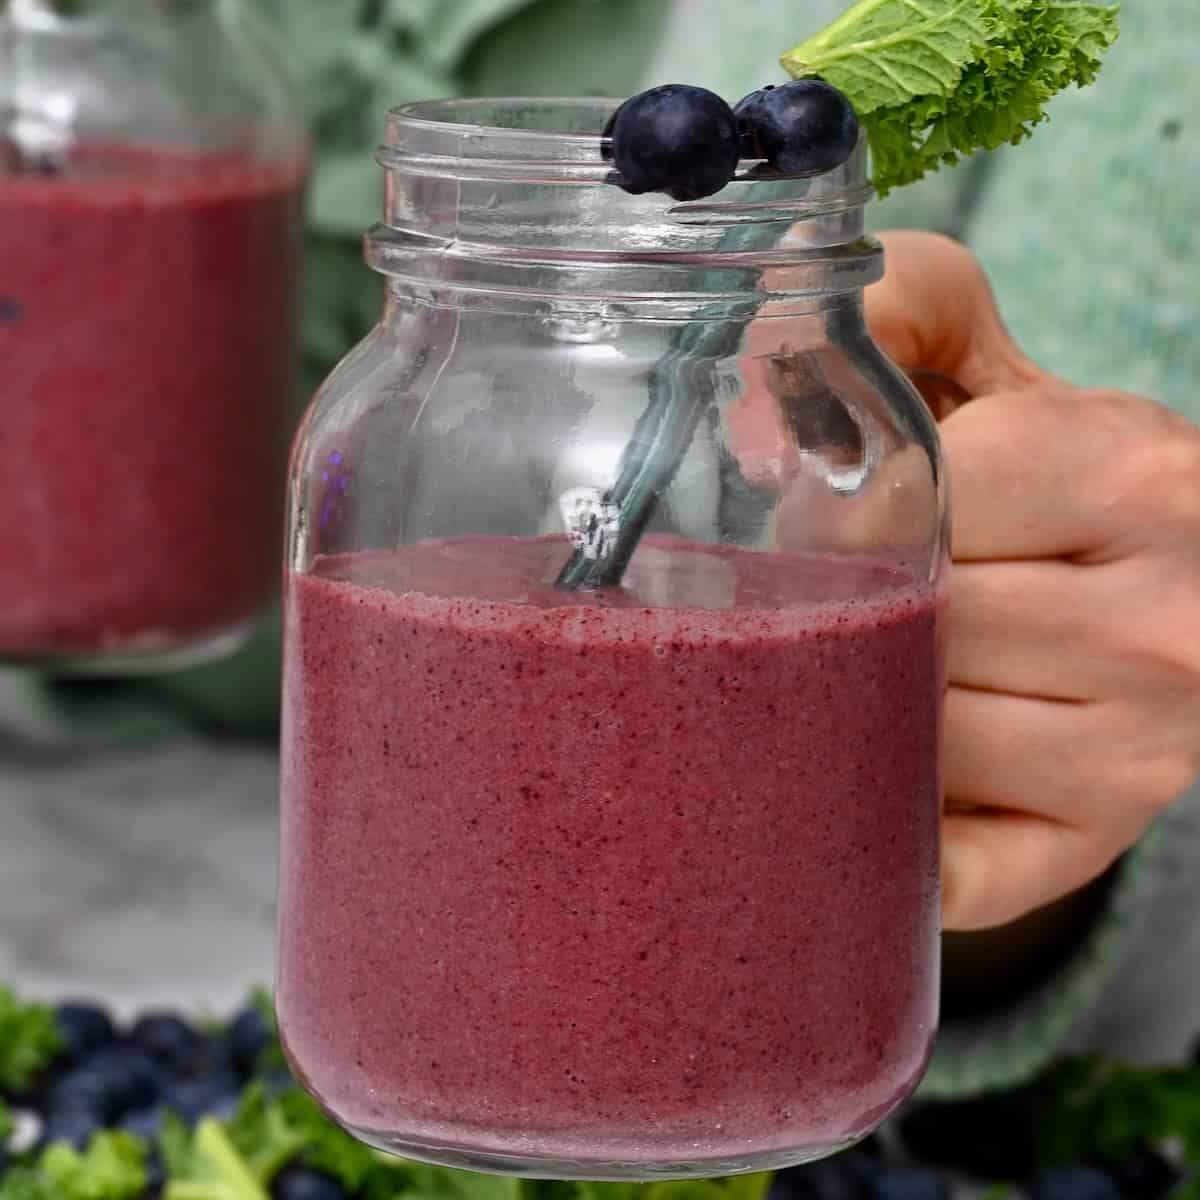 https://www.alphafoodie.com/wp-content/uploads/2022/03/Blueberry-Kale-Smoothie-Square.jpeg